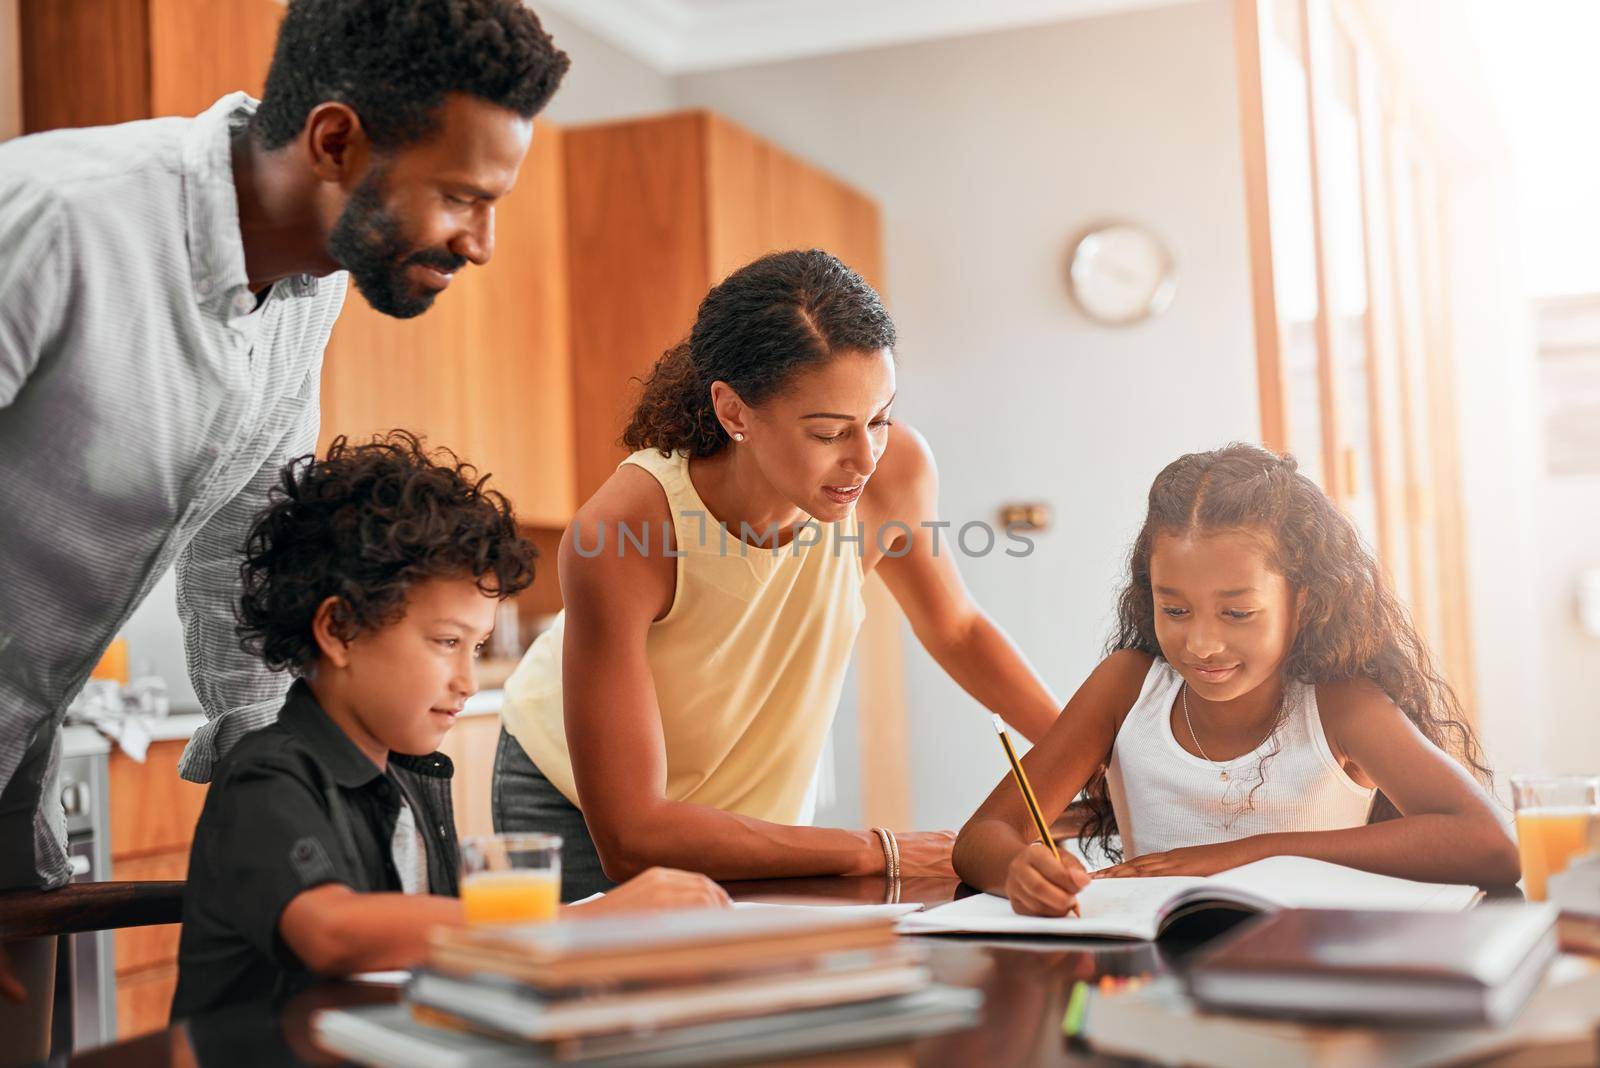 Getting homework done before playtime. parents helping their two children with their homework